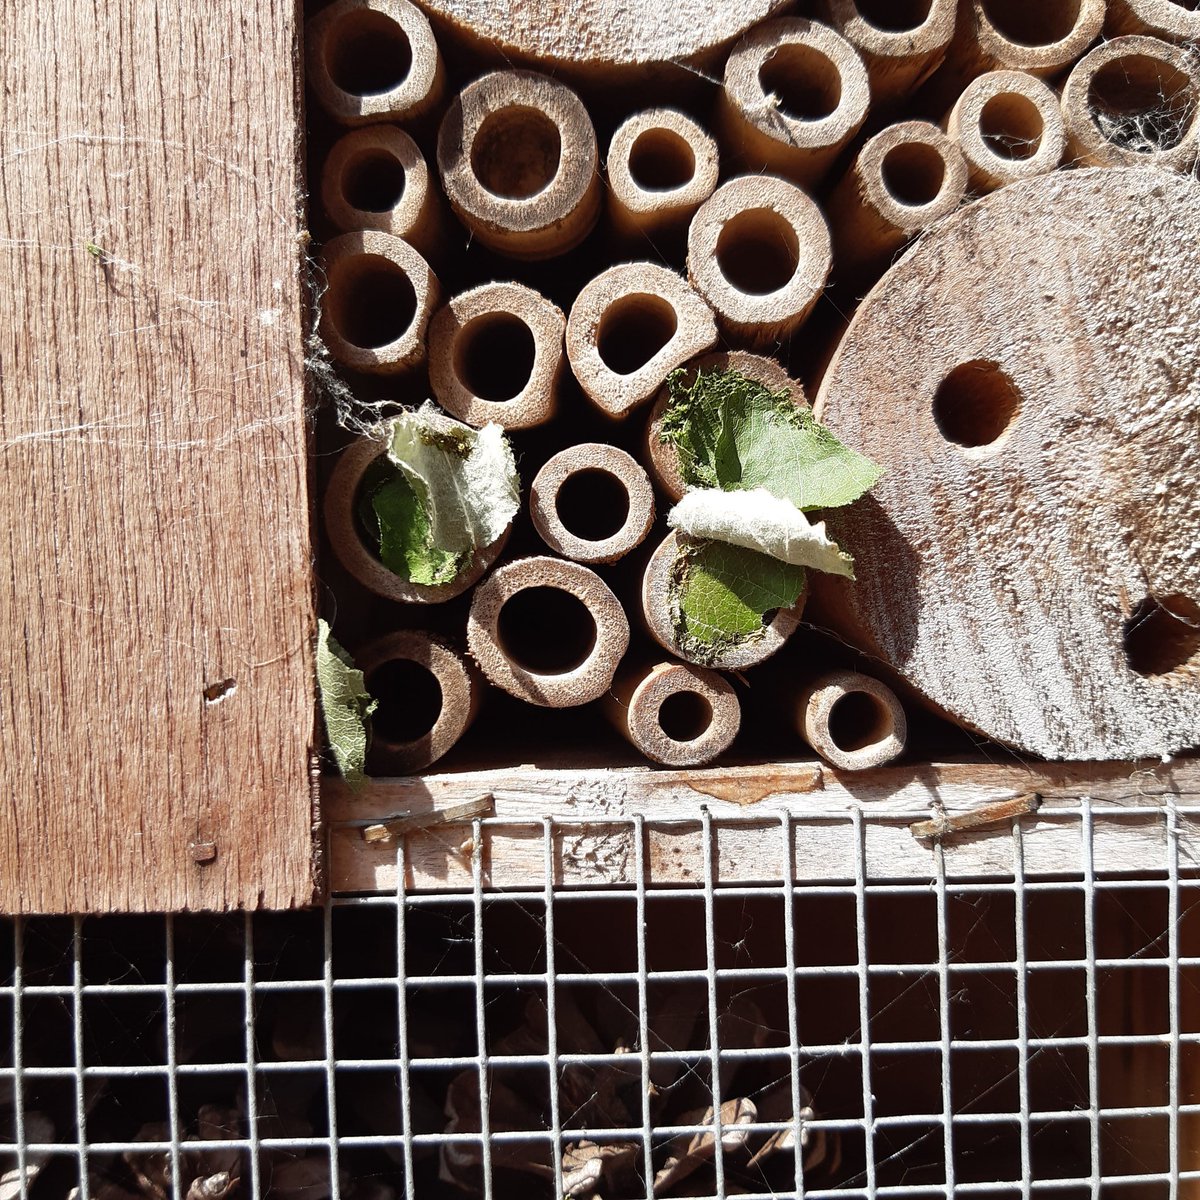 Huge excitement! After many years of nothing, we have got #leafcutterbees staying in our insect hotel! 🐝
#bees #insects #savethebees #rhs